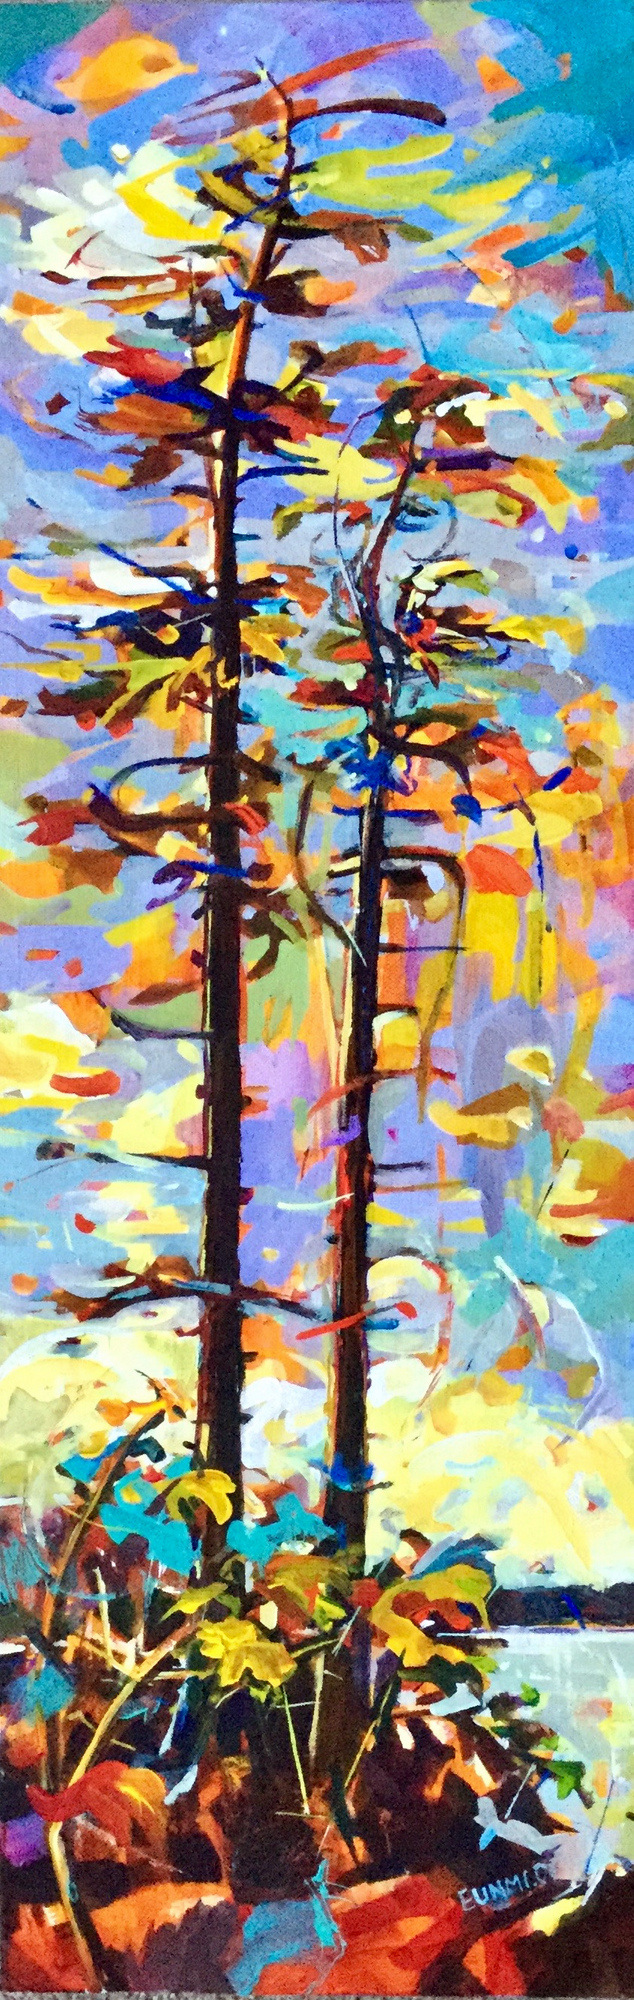 Landscape painting, Fall Is In The Air II by Eunmi Conacher at The Avenue Gallery, a contemporary fine art gallery in Victoria, BC, Canada.